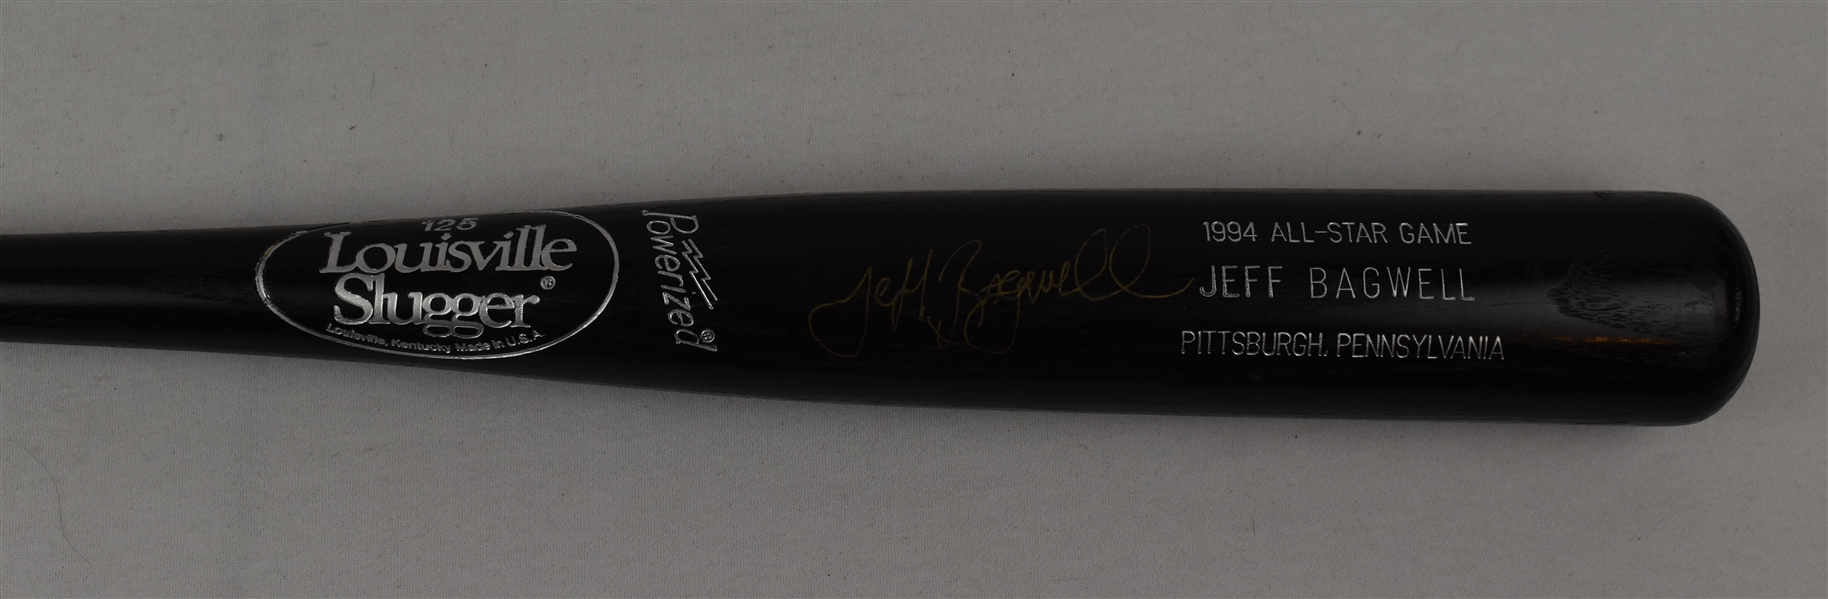 Jeff Bagwell 1994 All-Star Game Used & Autographed Bat w/Puckett Family Provenance